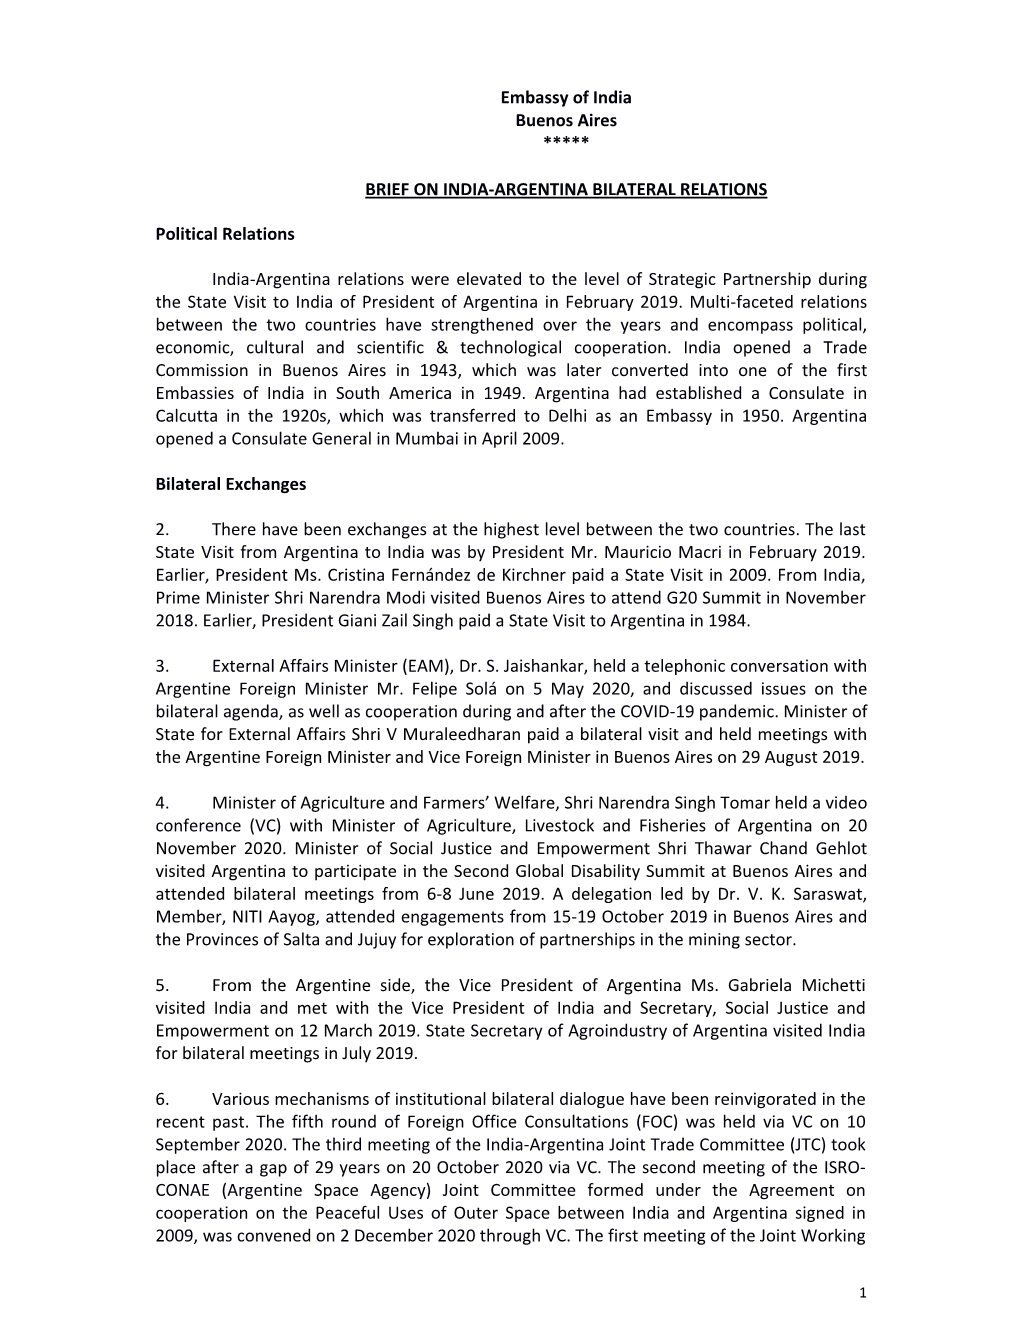 Embassy of India Buenos Aires ***** BRIEF on INDIA-ARGENTINA